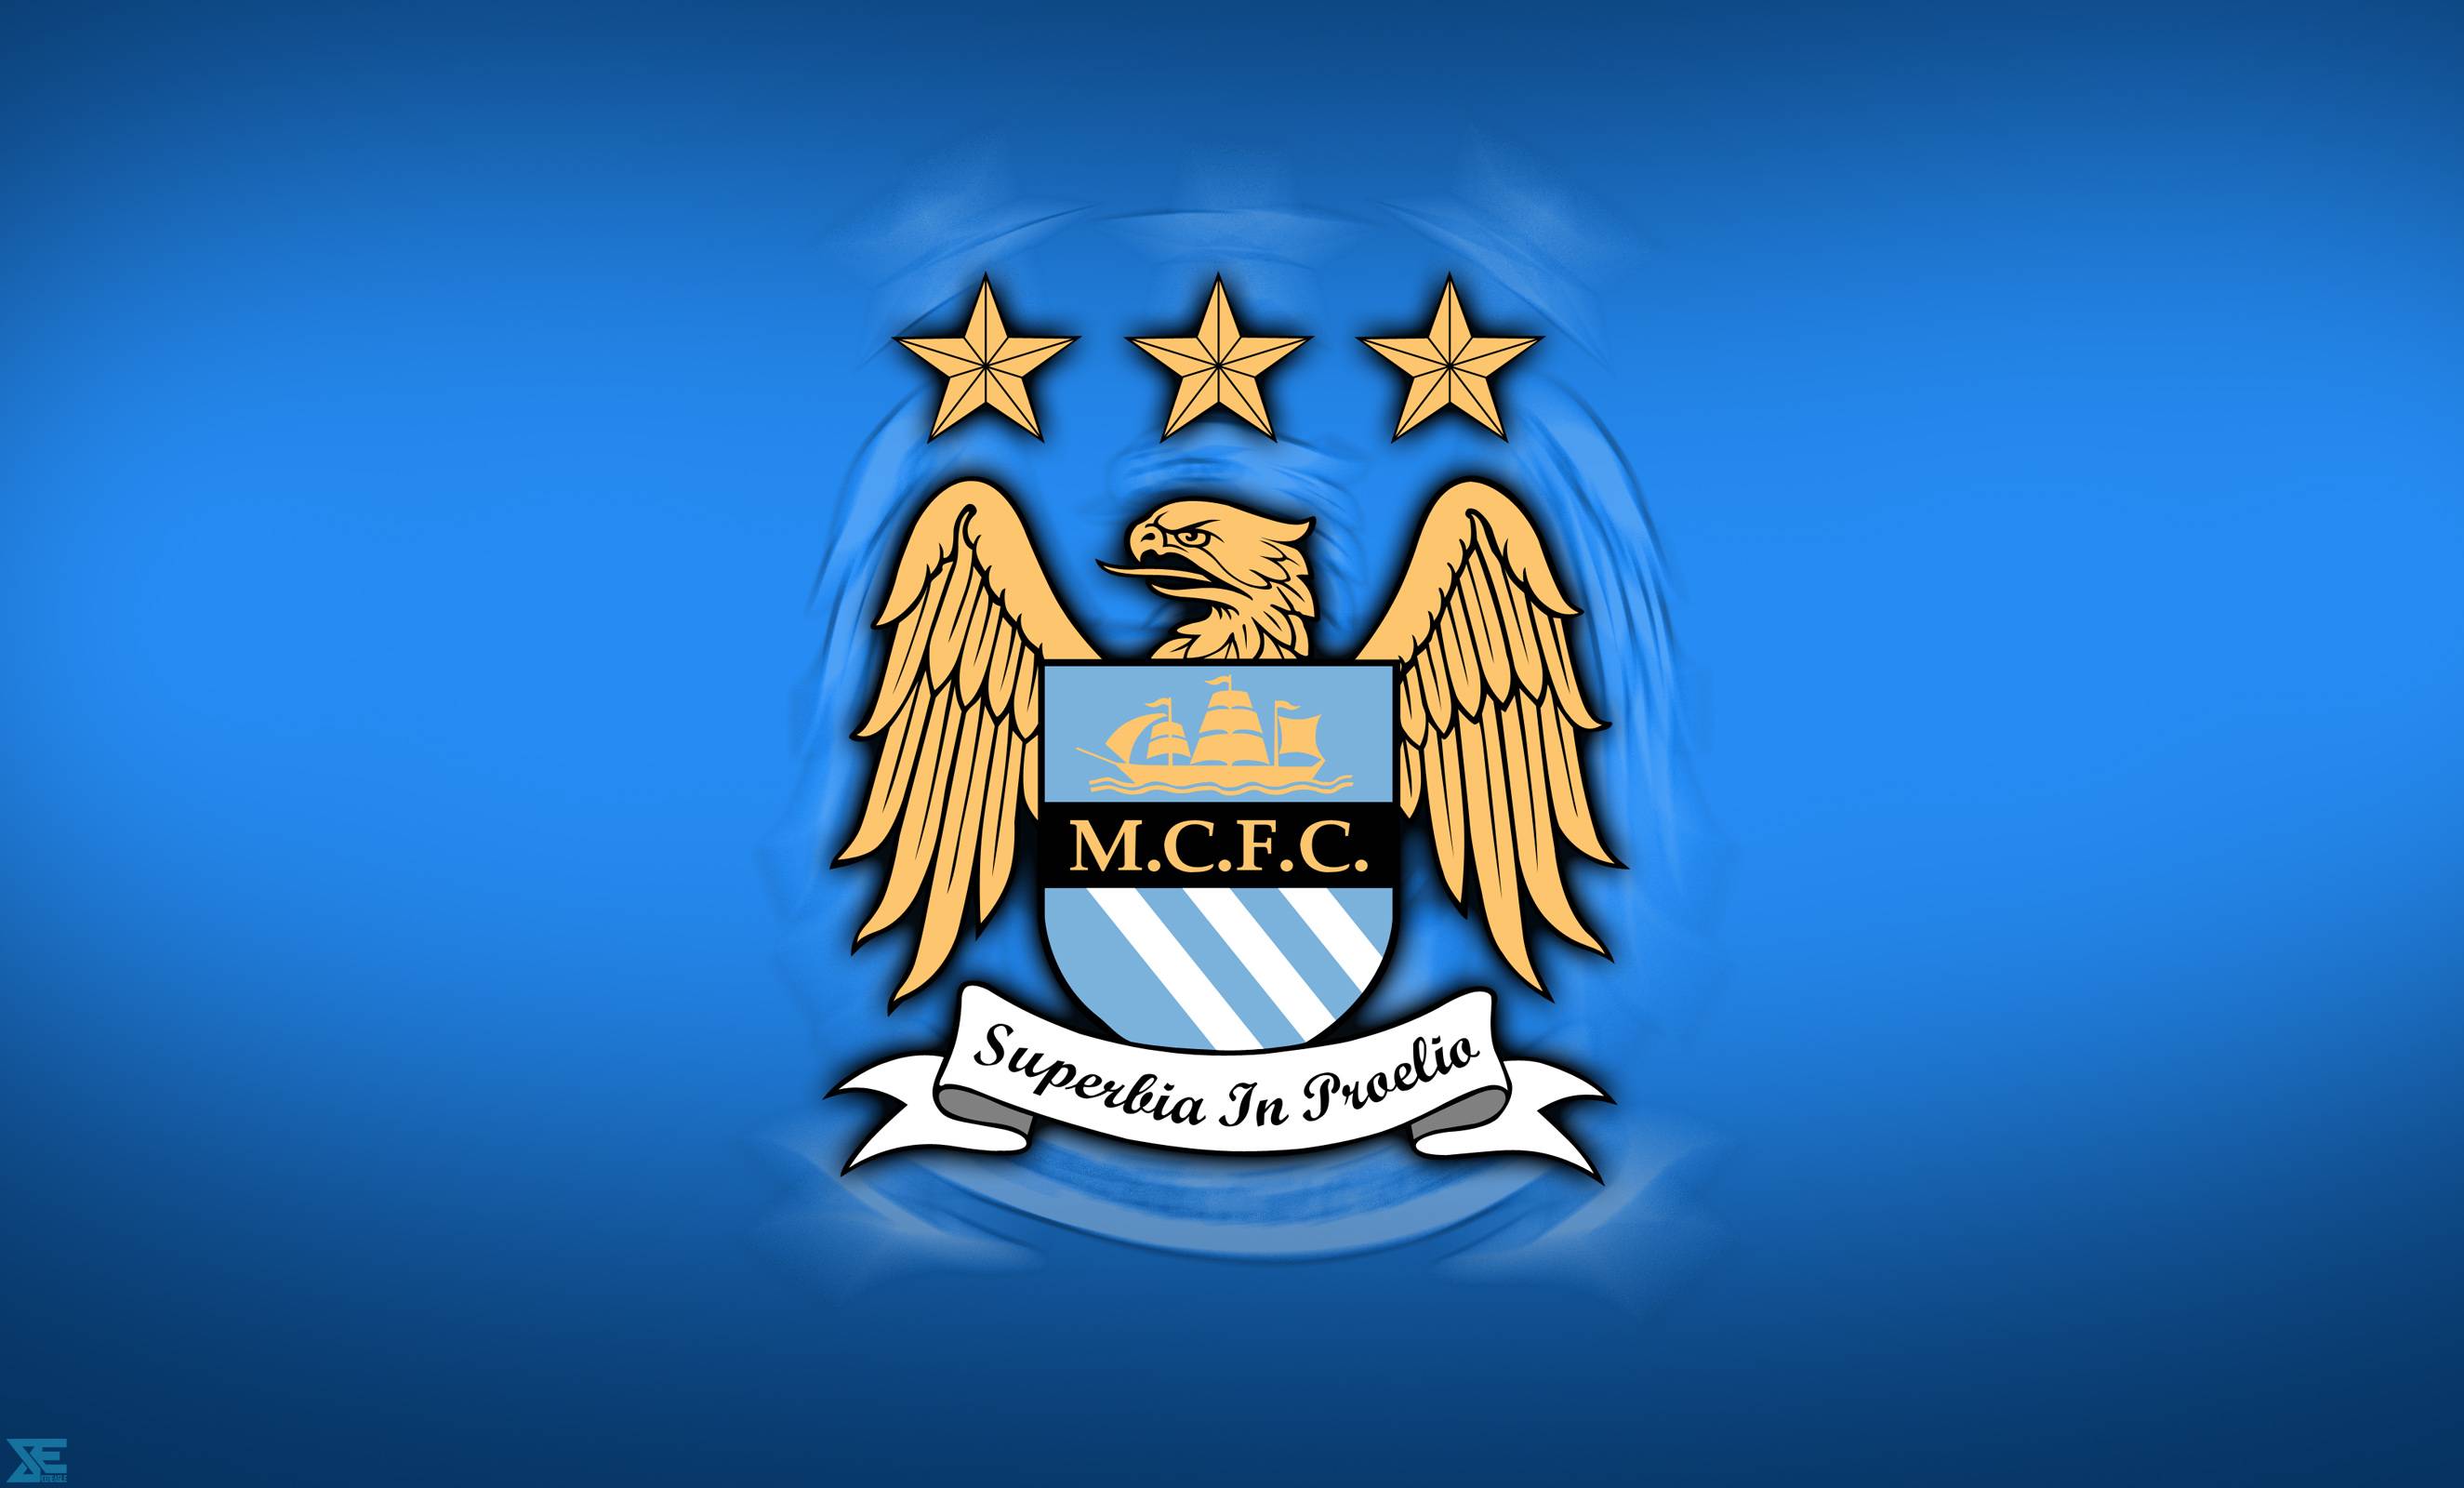 Manchester City Soccer Wallpaper. Manchester City Image. Cool